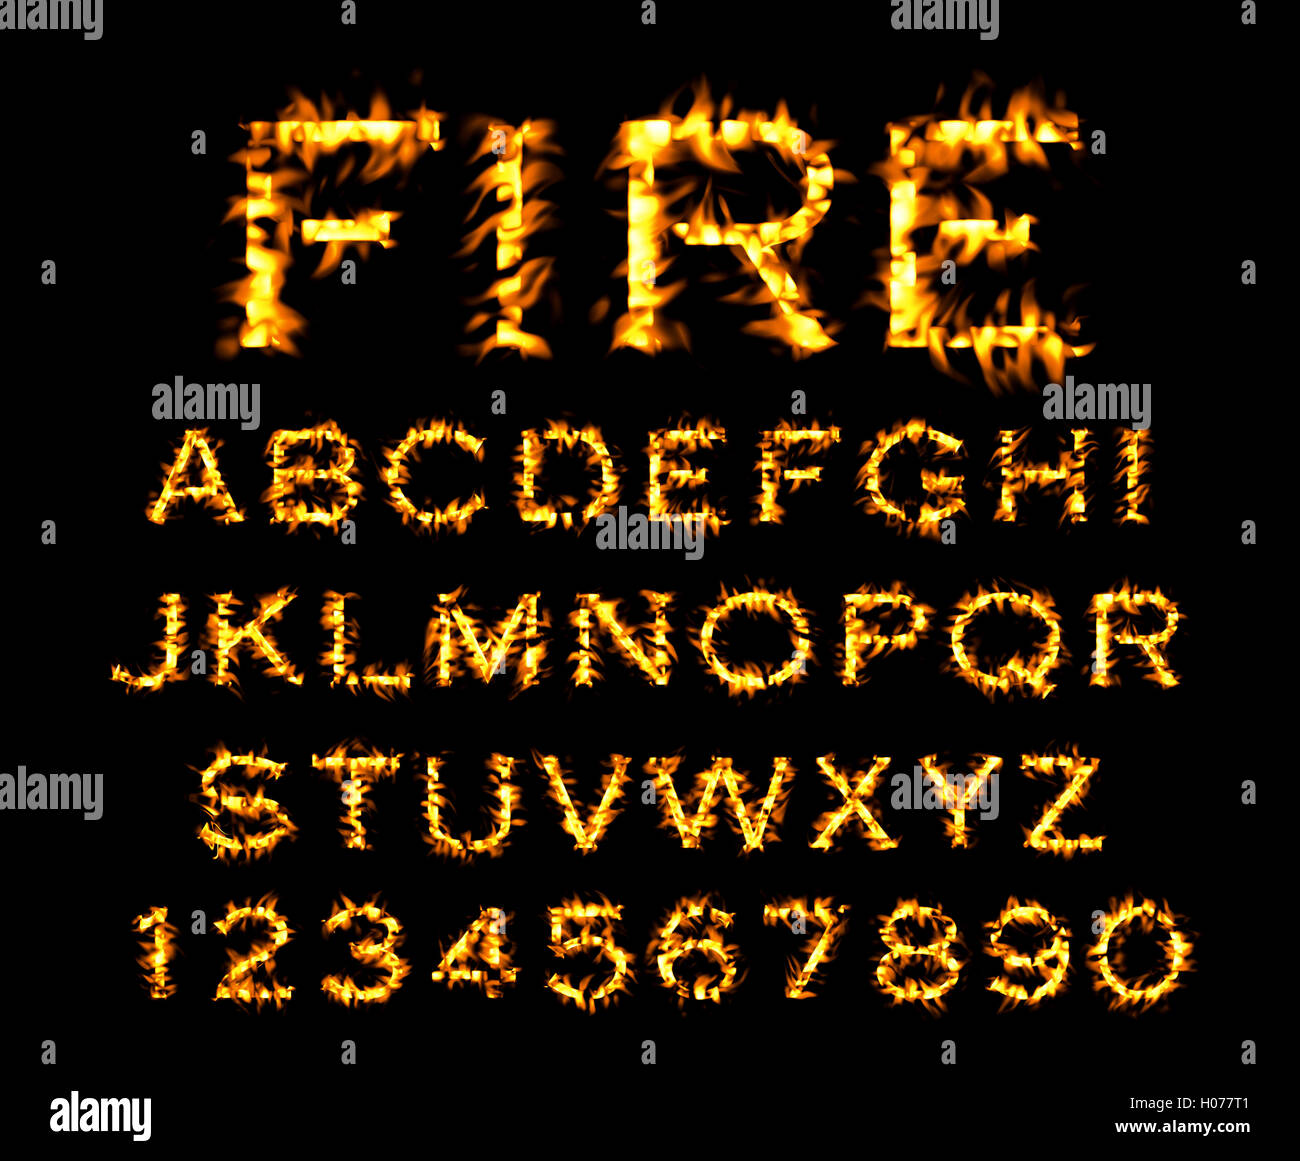 Burning Fire Fonts High Resolution Stock Photography and Images - Alamy